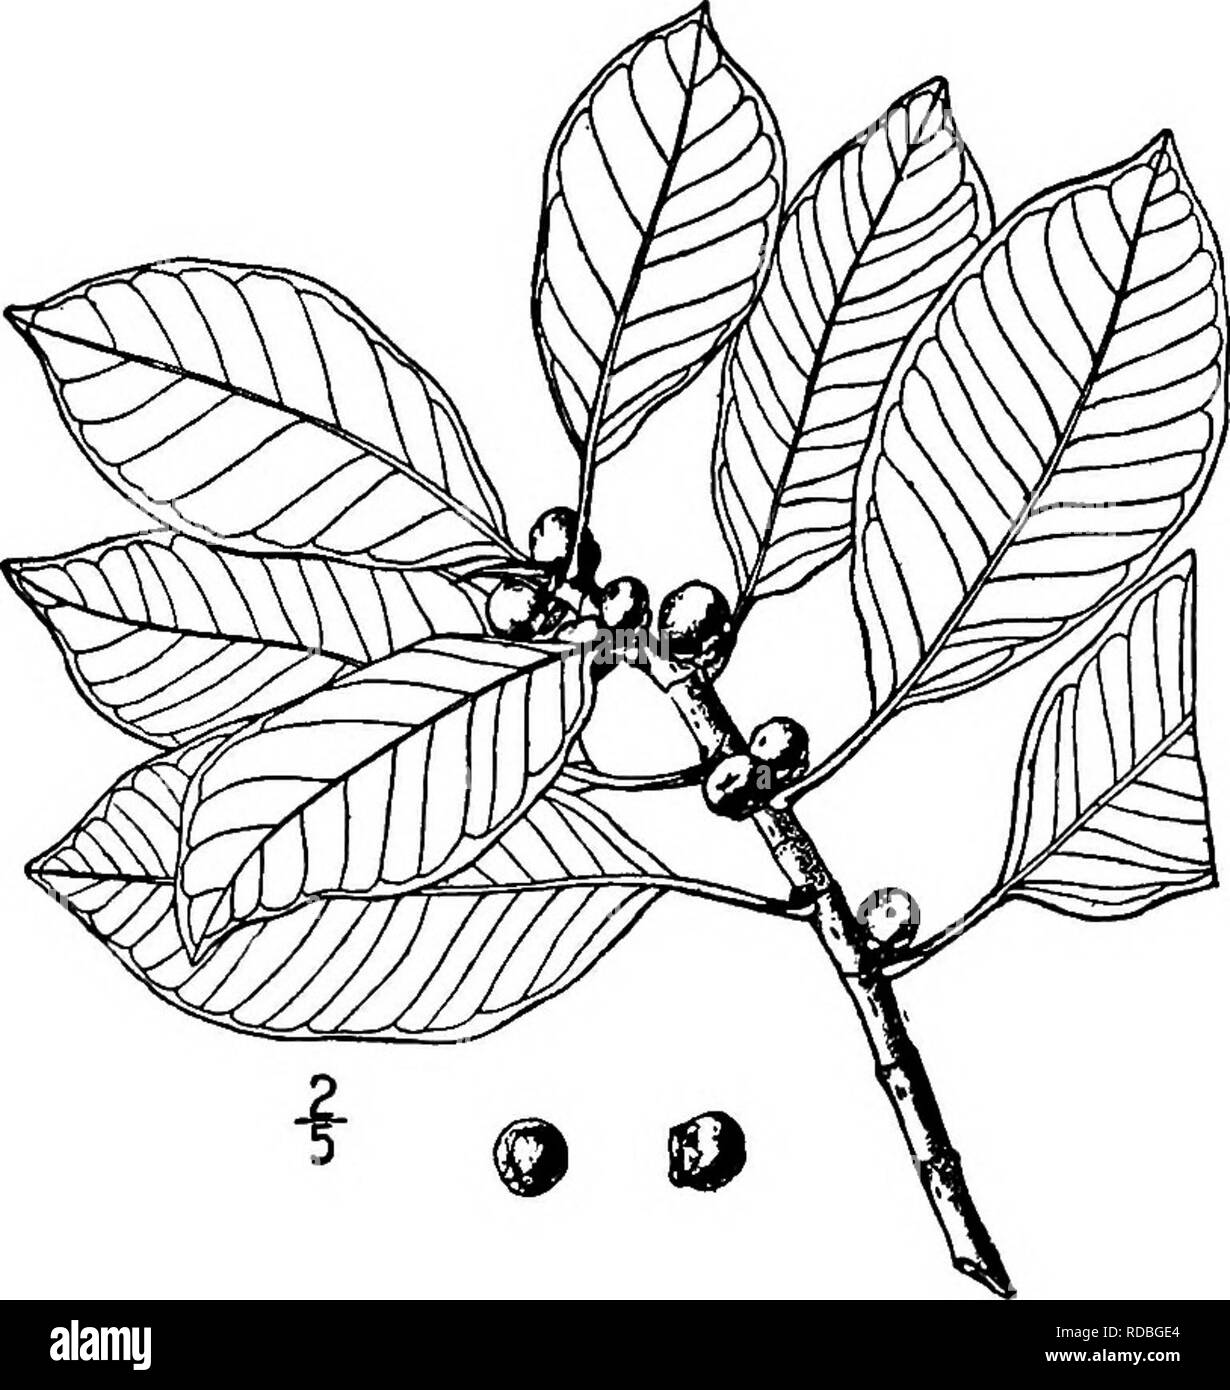 . North American trees : being descriptions and illustrations of the trees growing independently of cultivation in North America, north of Mexico and the West Indies . Trees. Golden Fig 369. Fig. 327. — Golden Fig. I. GOLDEN FIG—Ficus aurea NuttaU This tree starts into life as a parasite; the seed germinating in the crevices of the bark of other trees, produces aerial roots which, when they reach the ground, take root and become trunks; often several of these descend parallel, and sur- rounding the trunk of their host, finally come together and strangle, it. The branches also send down roots,  Stock Photo